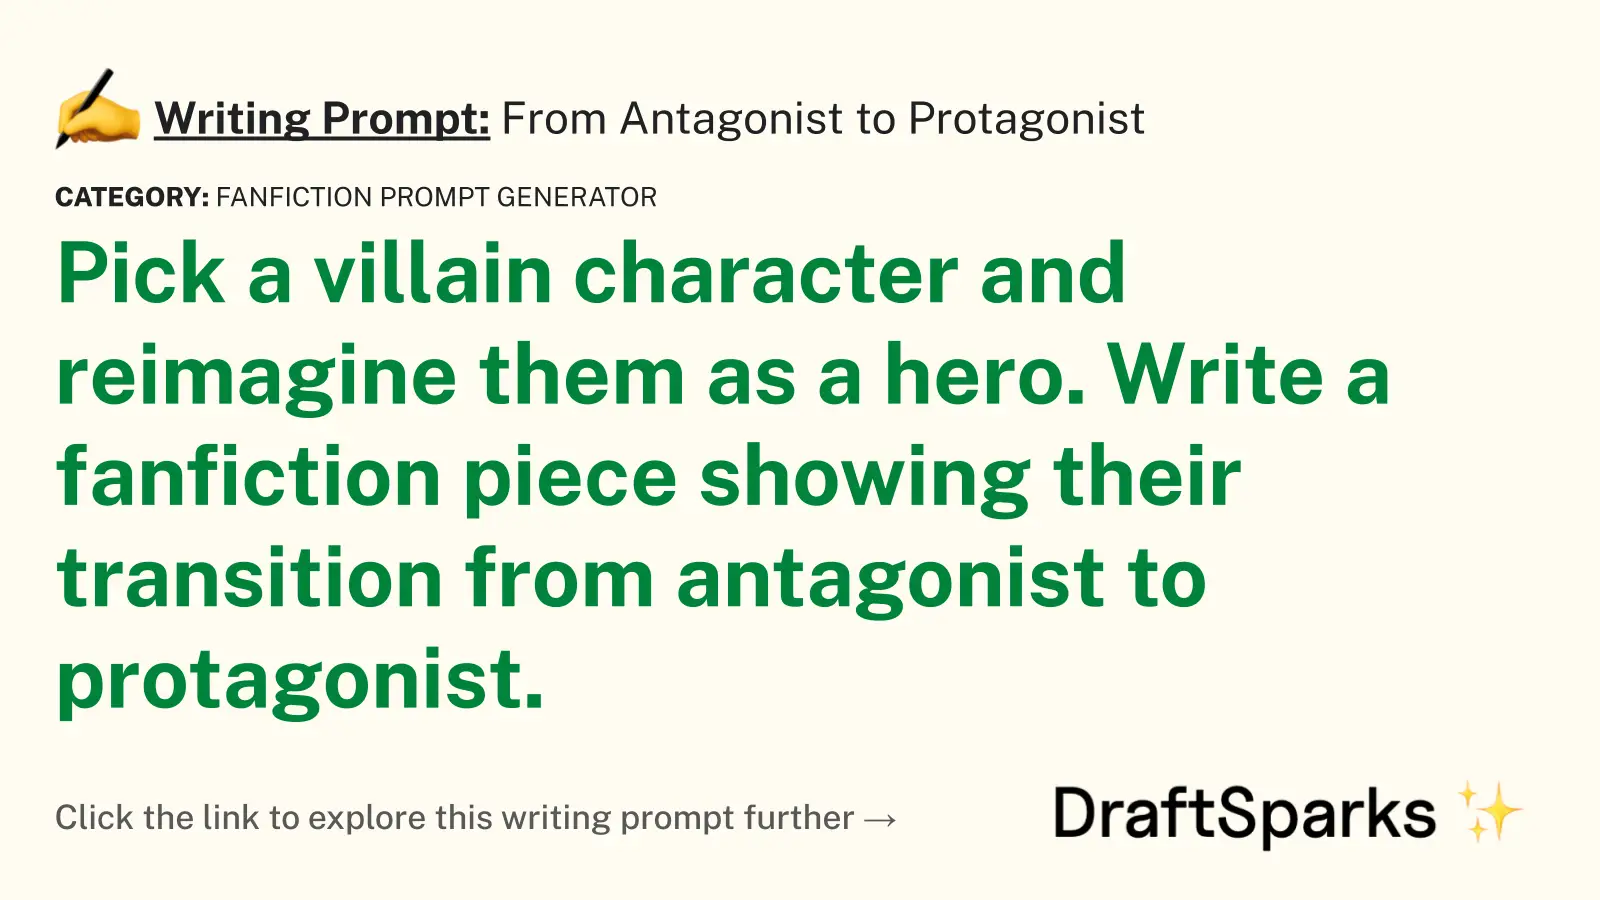 From Antagonist to Protagonist